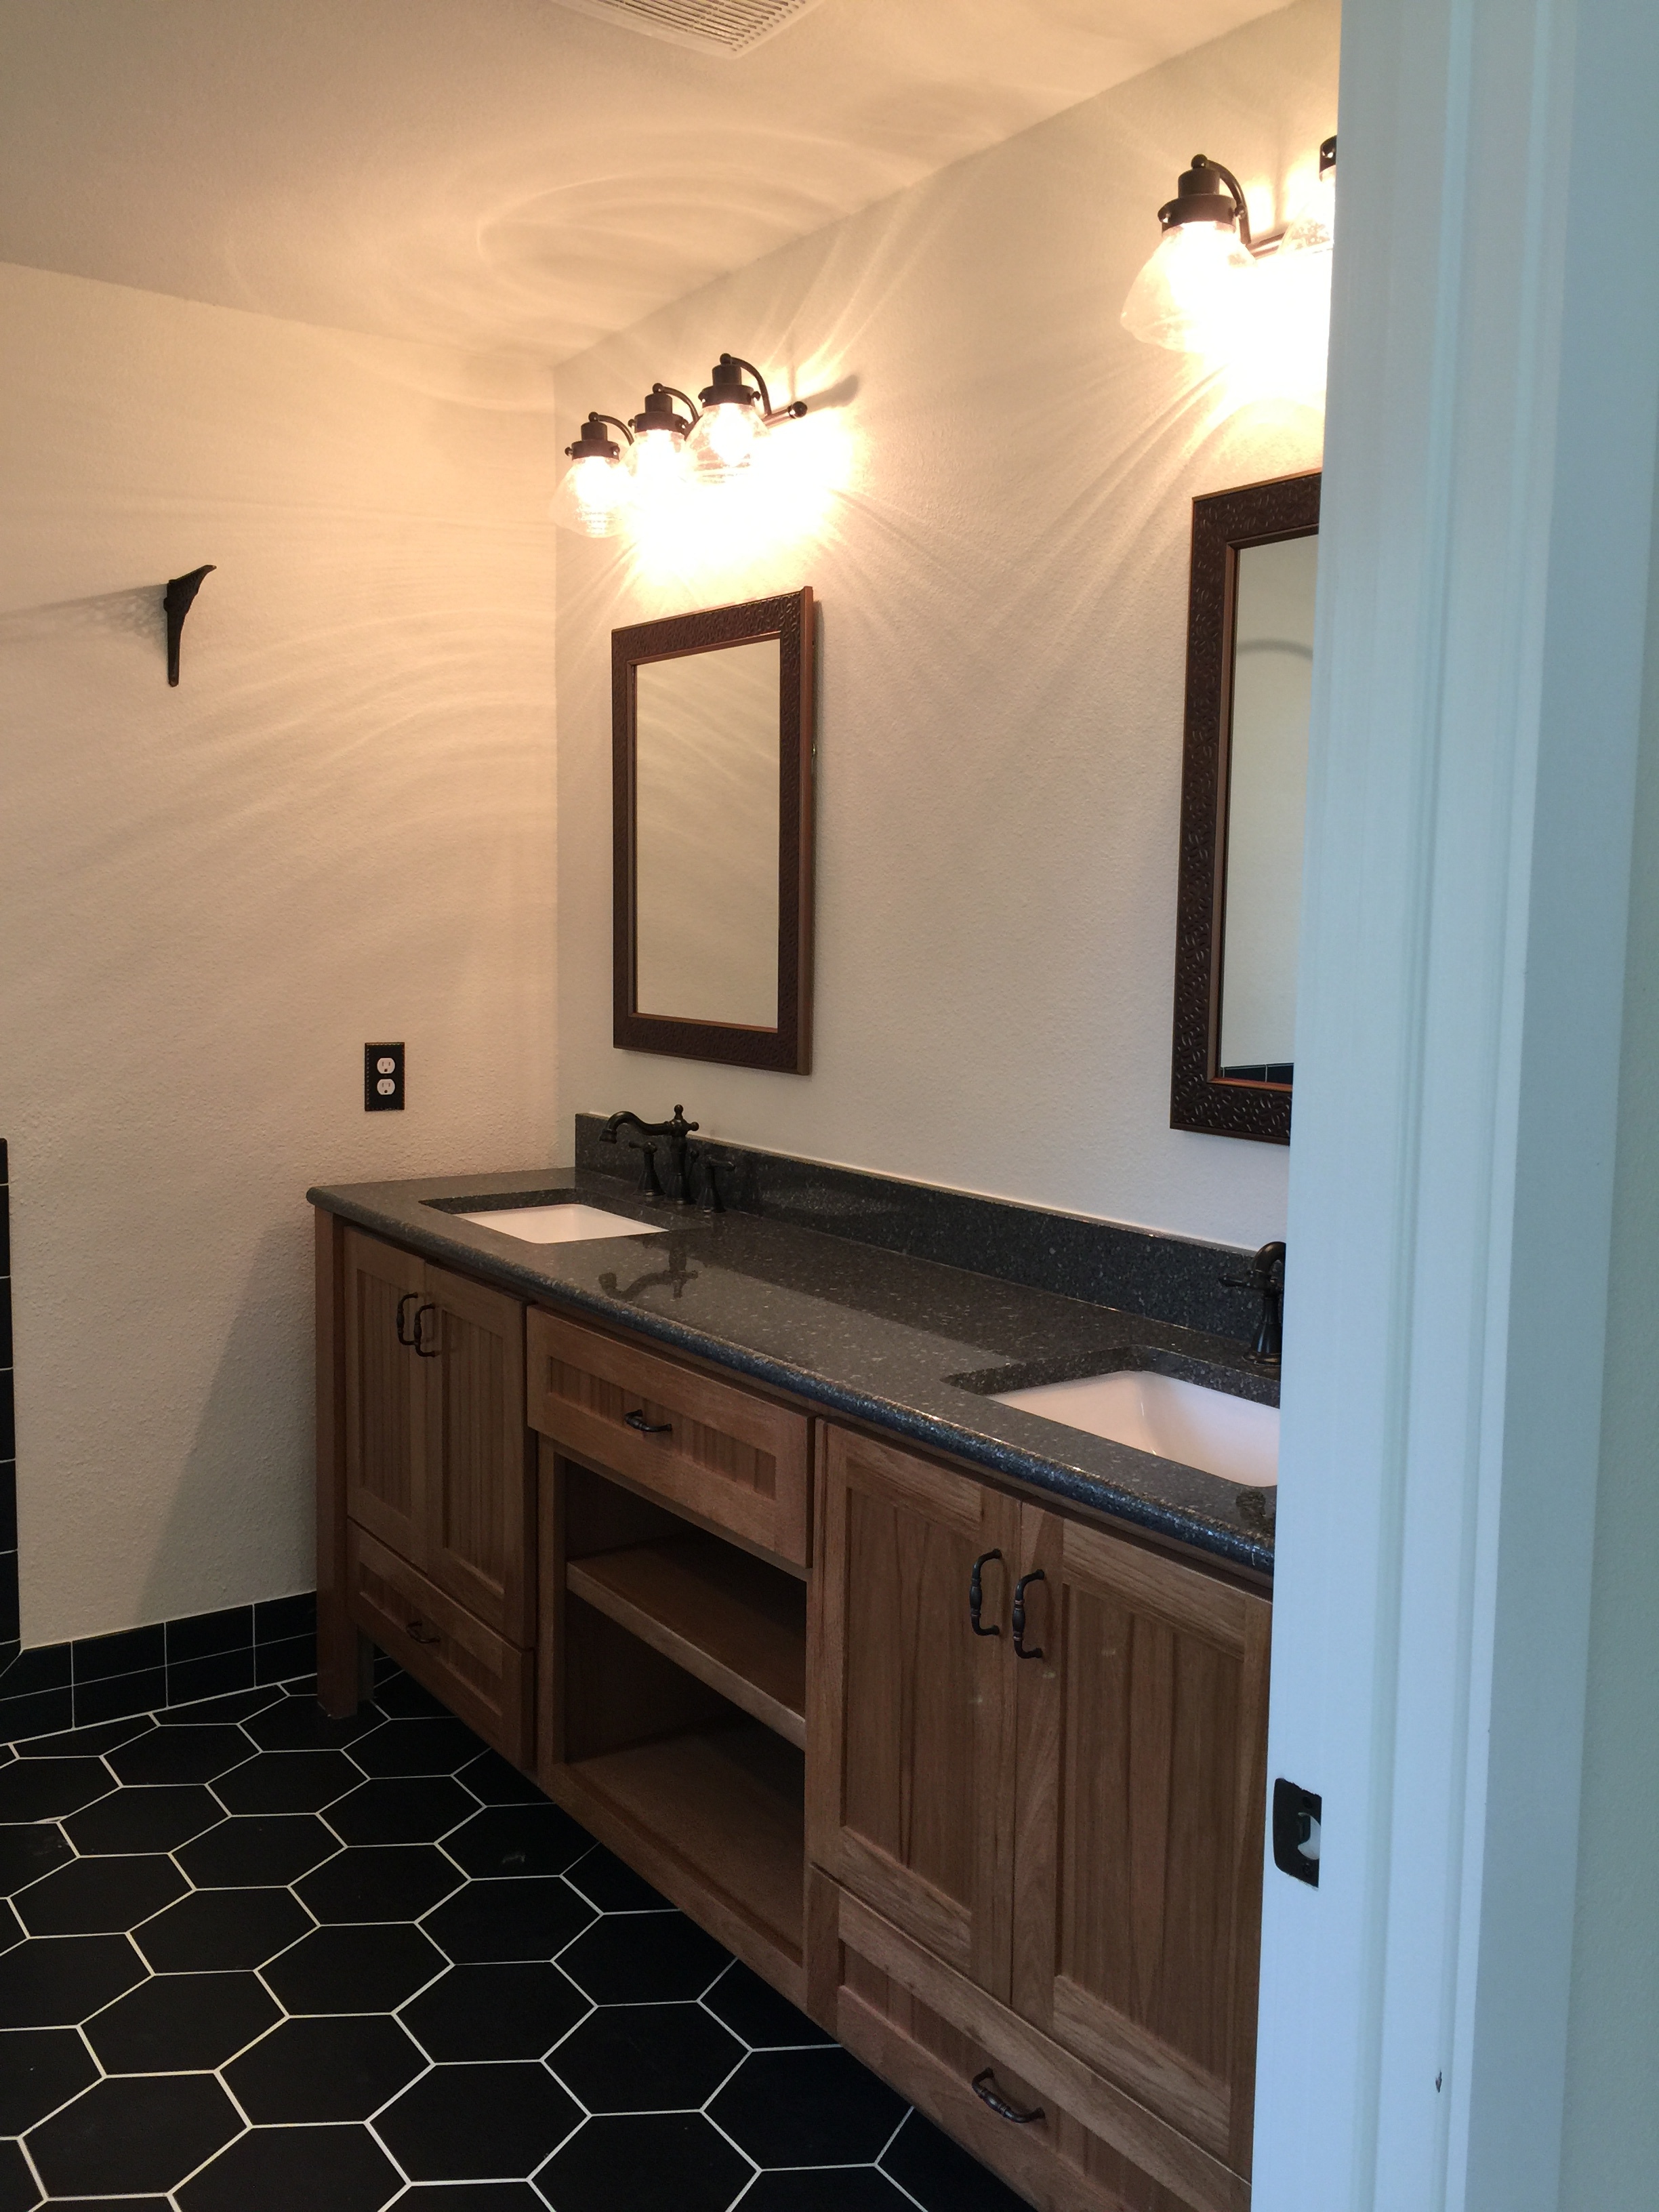 910 PLL - Finished Master Bath, mirrors and lights.JPG